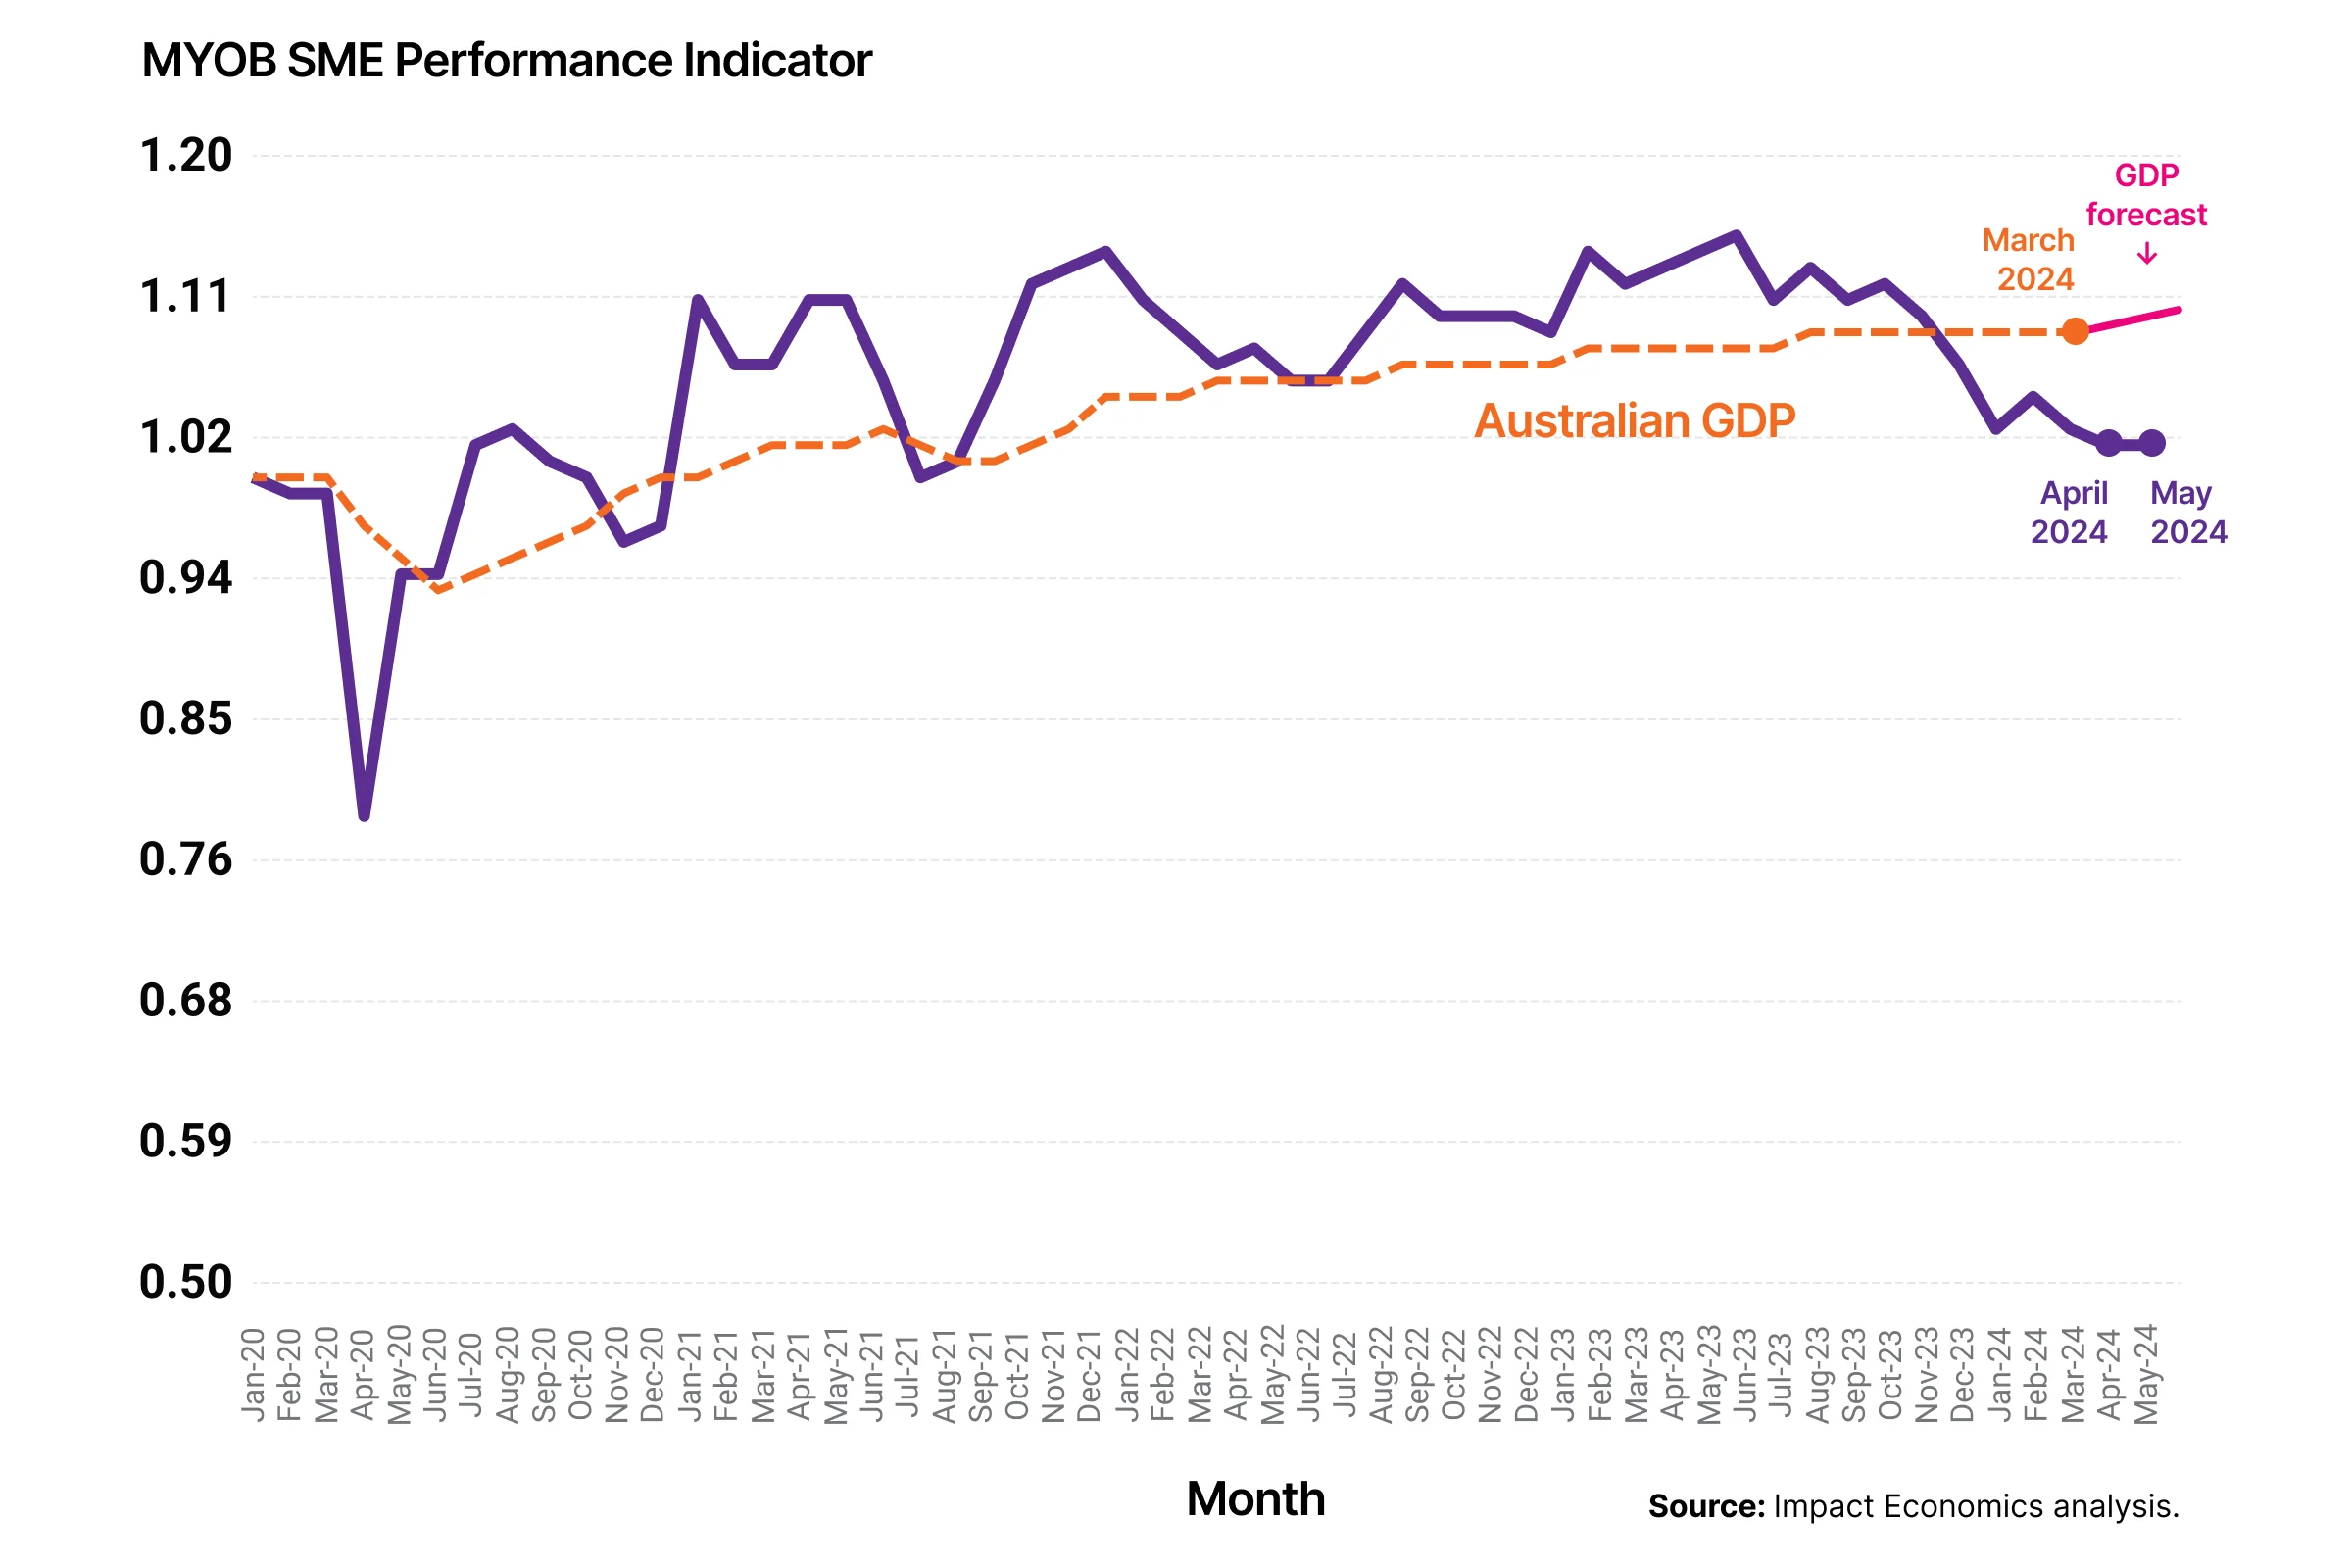 Graph showing sme performance indicator and gdp